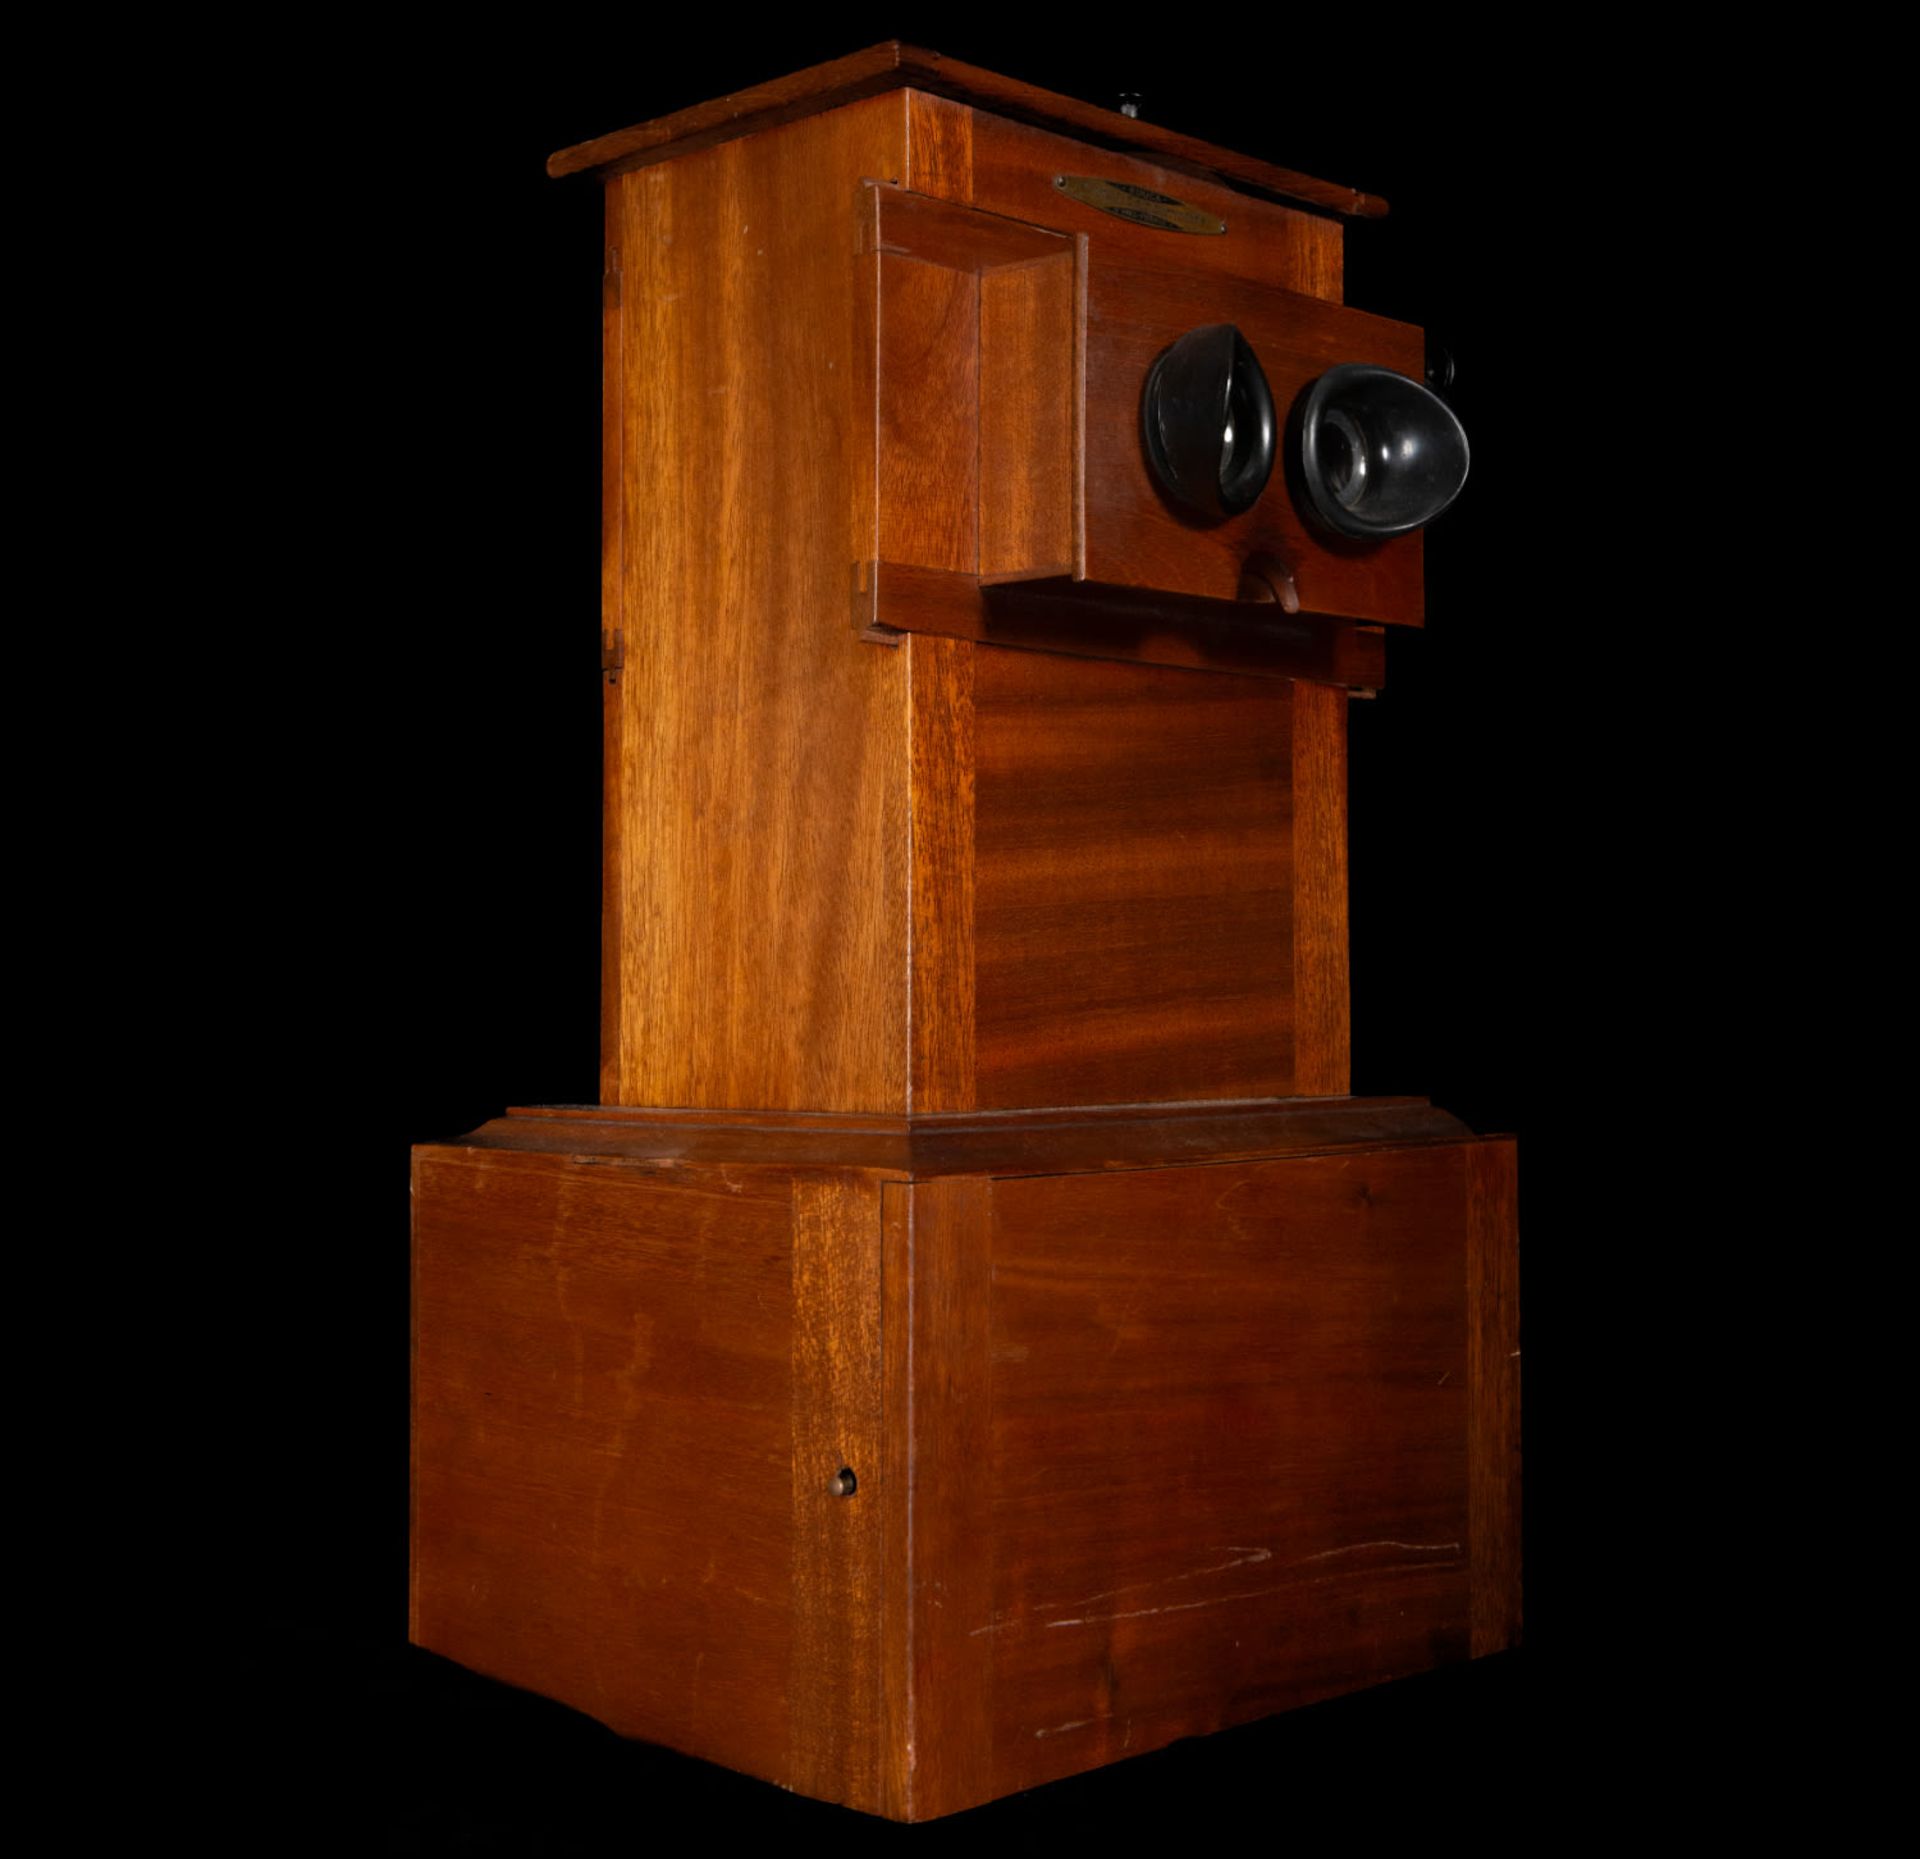 19th century slide projector - Image 4 of 5